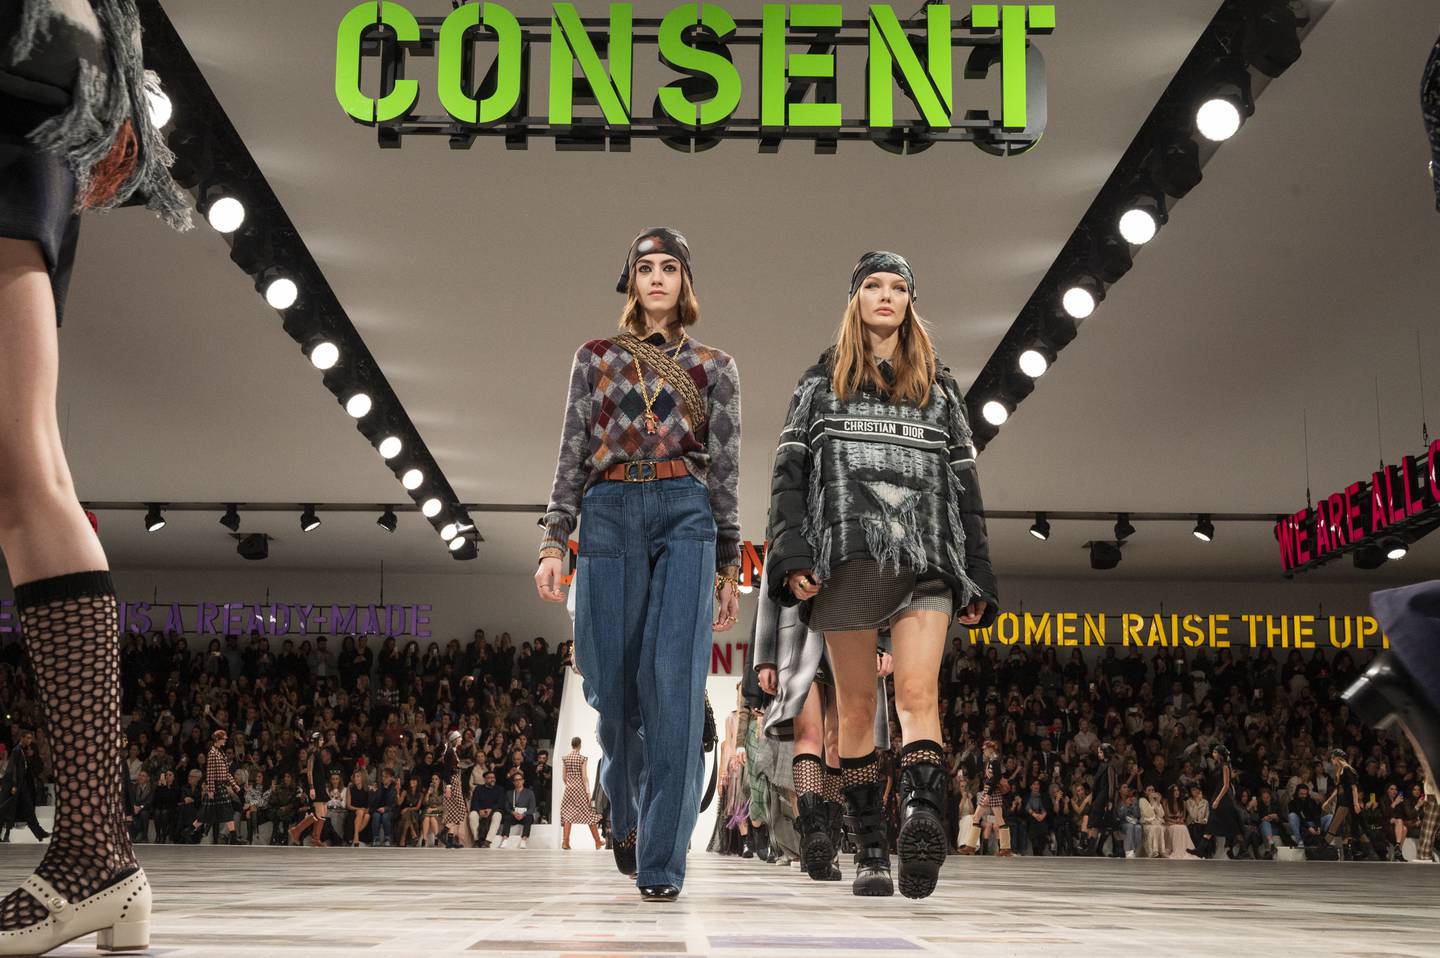 Dior's "Consent" sign at its fall-winter 2020-2021 show was a continuation of Maria Grazia Chiuri's focus on putting social statements on the runway.